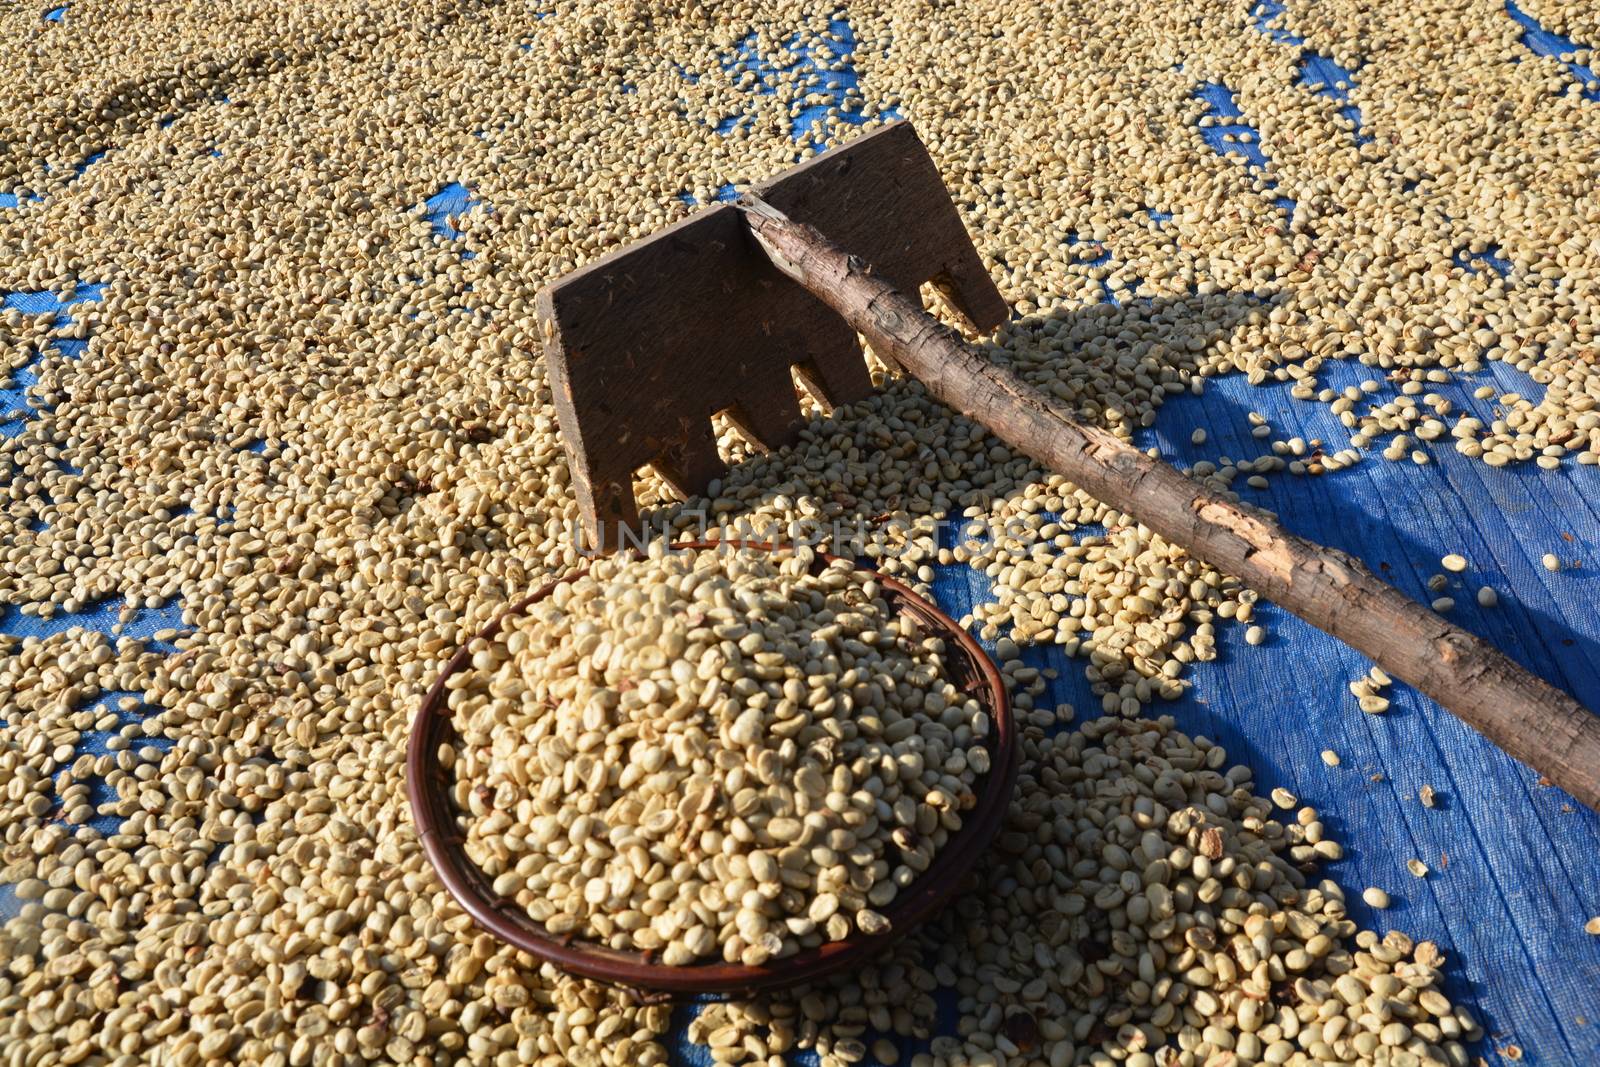 Arabica Coffee beans drying in the sun. by ideation90